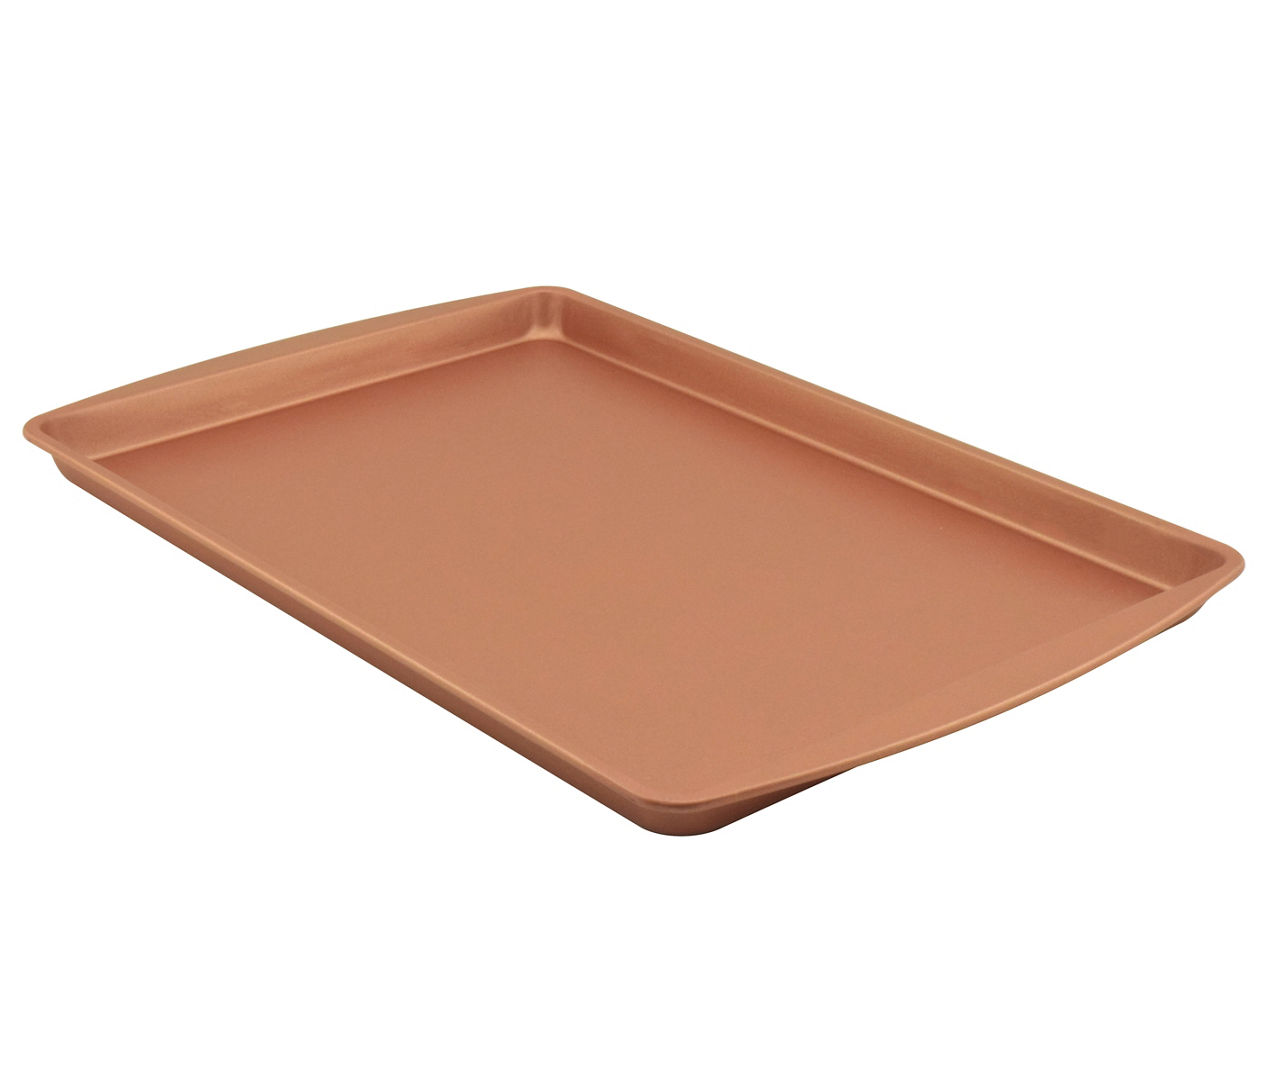 Eco Home Textured Non-Stick 12 x 9 Gold Baking Sheet | Big Lots